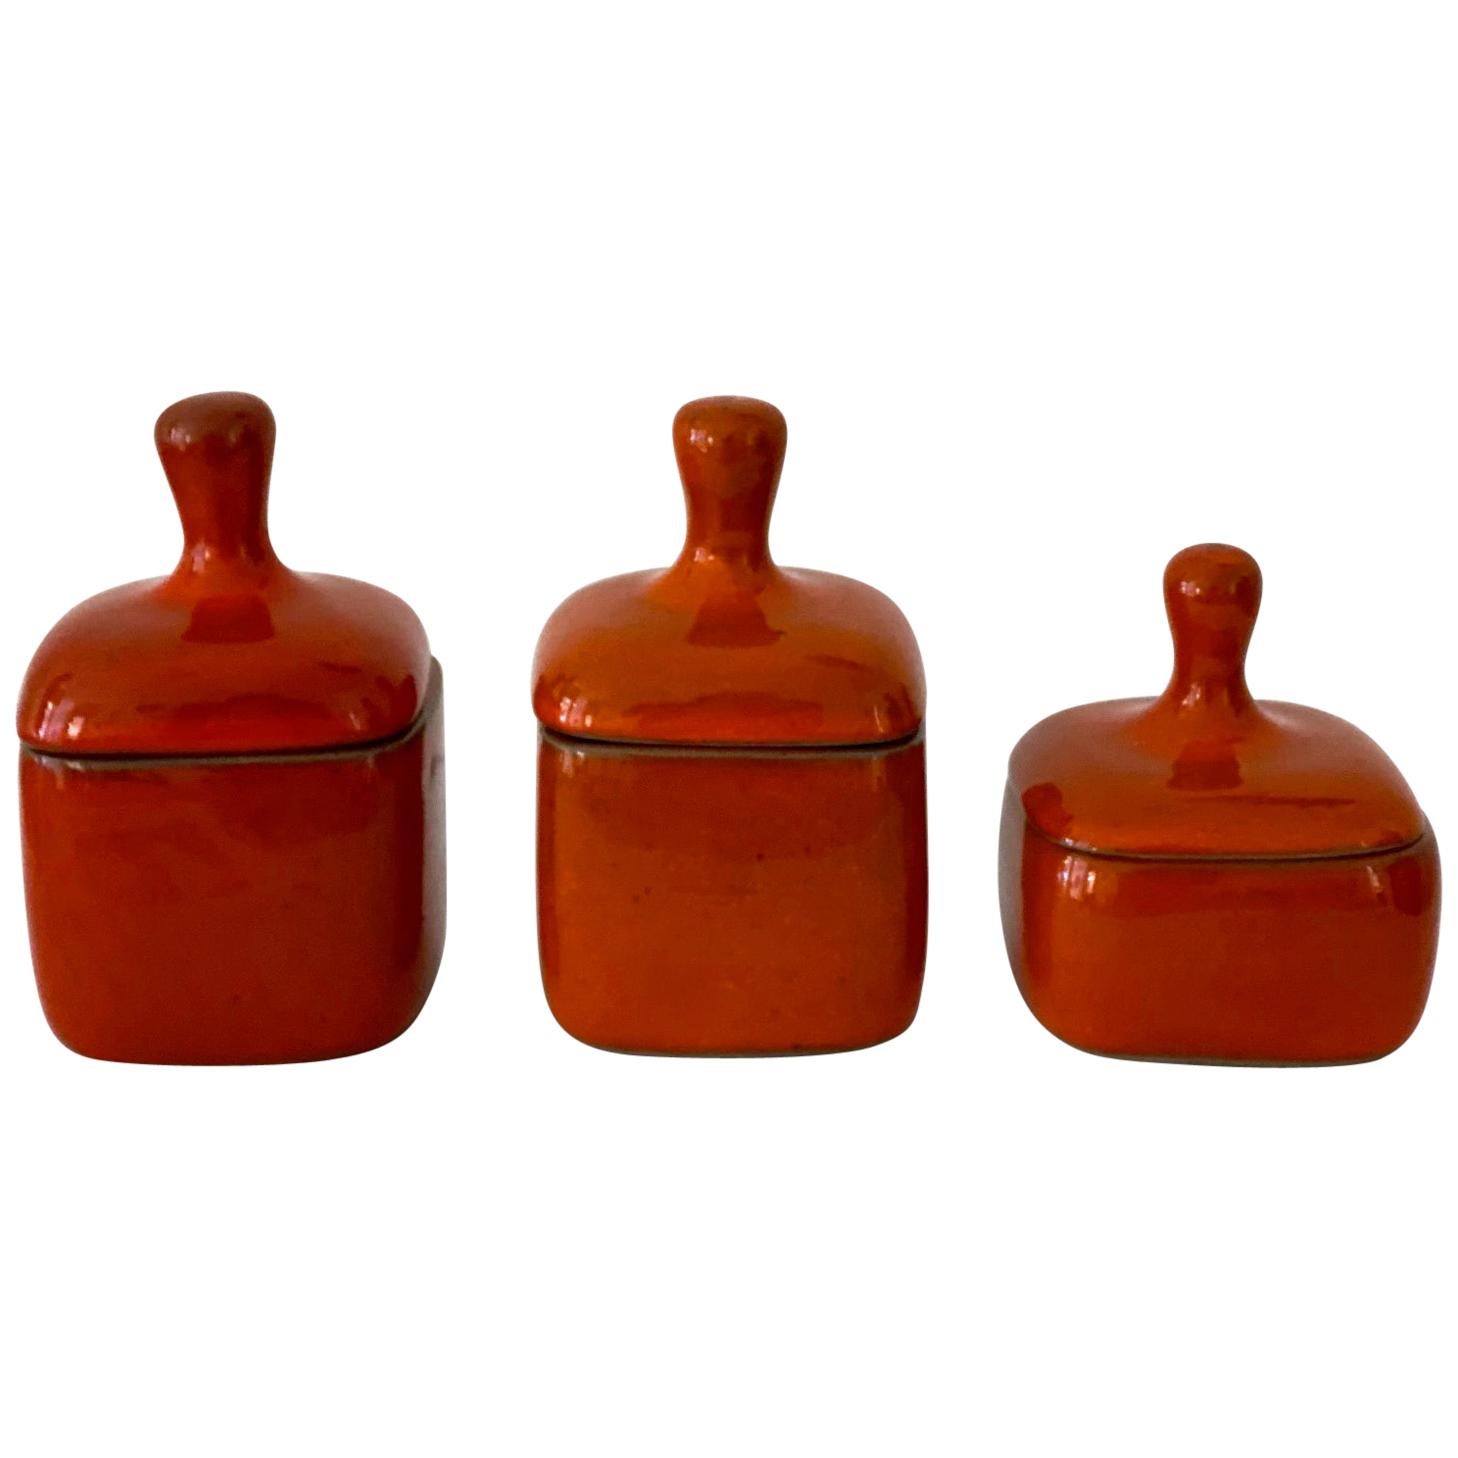 Set of Three Red Ceramic Boxes by Ruelland